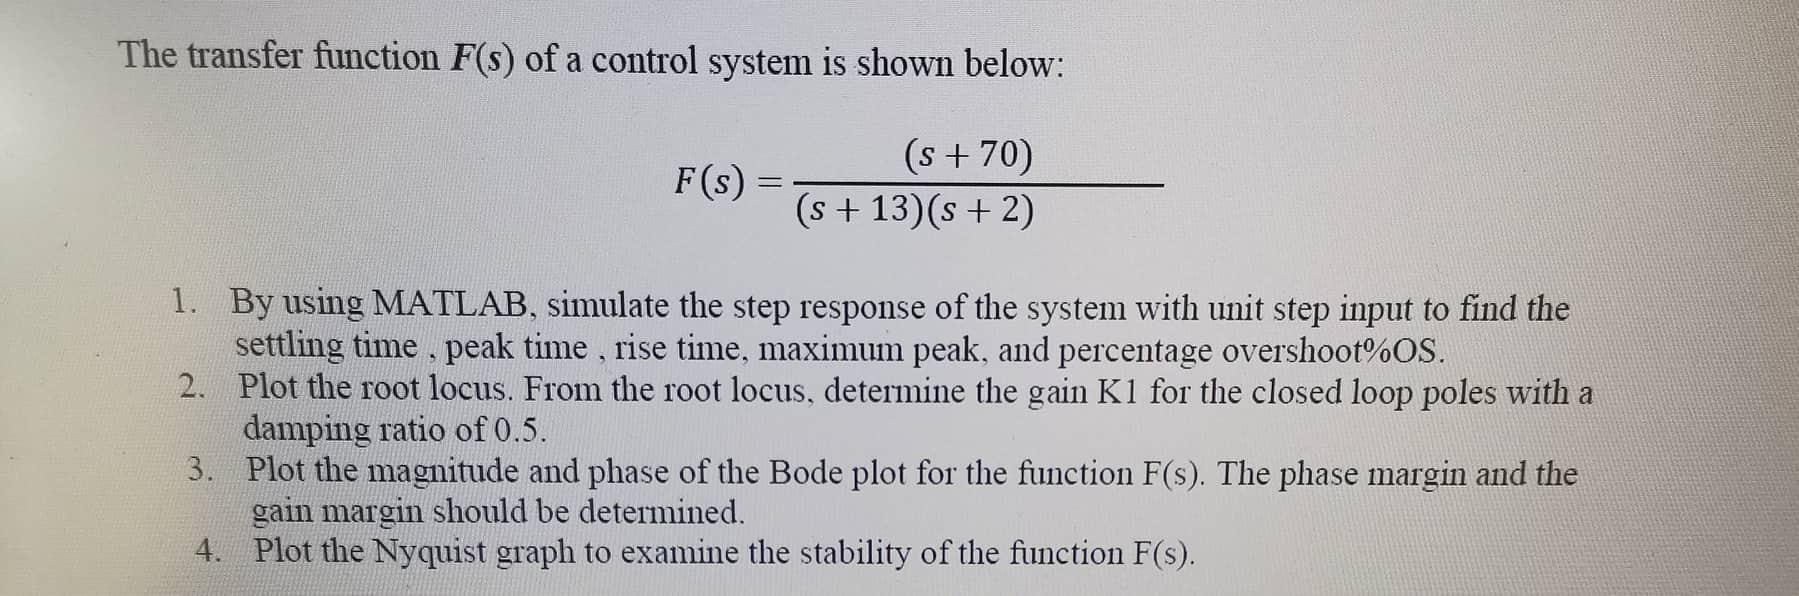 The transfer function ( F(s) ) of a control system is shown below: [ F(s)=frac{(s+70)}{(s+13)(s+2)} ] 1. By using MATLAB